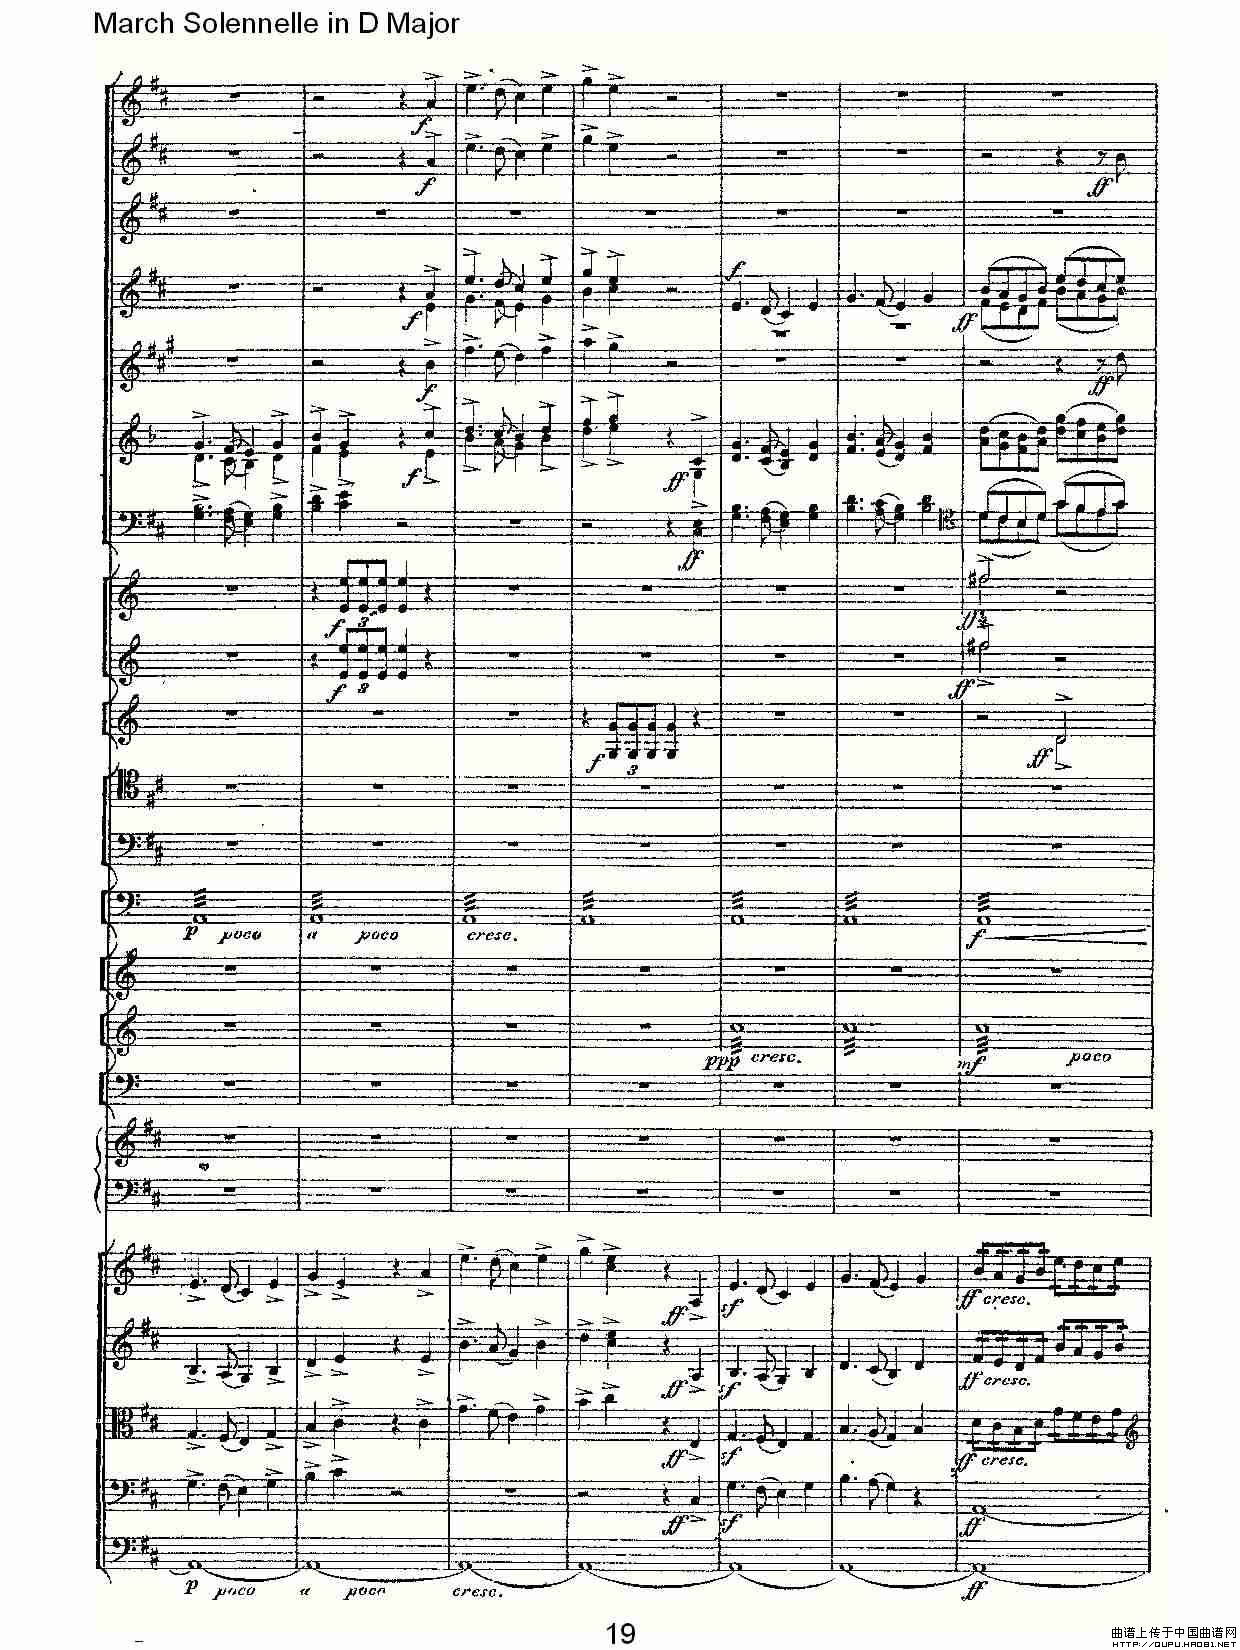 March Solennelle in D Major    D大调军管乐其它曲谱（图10）